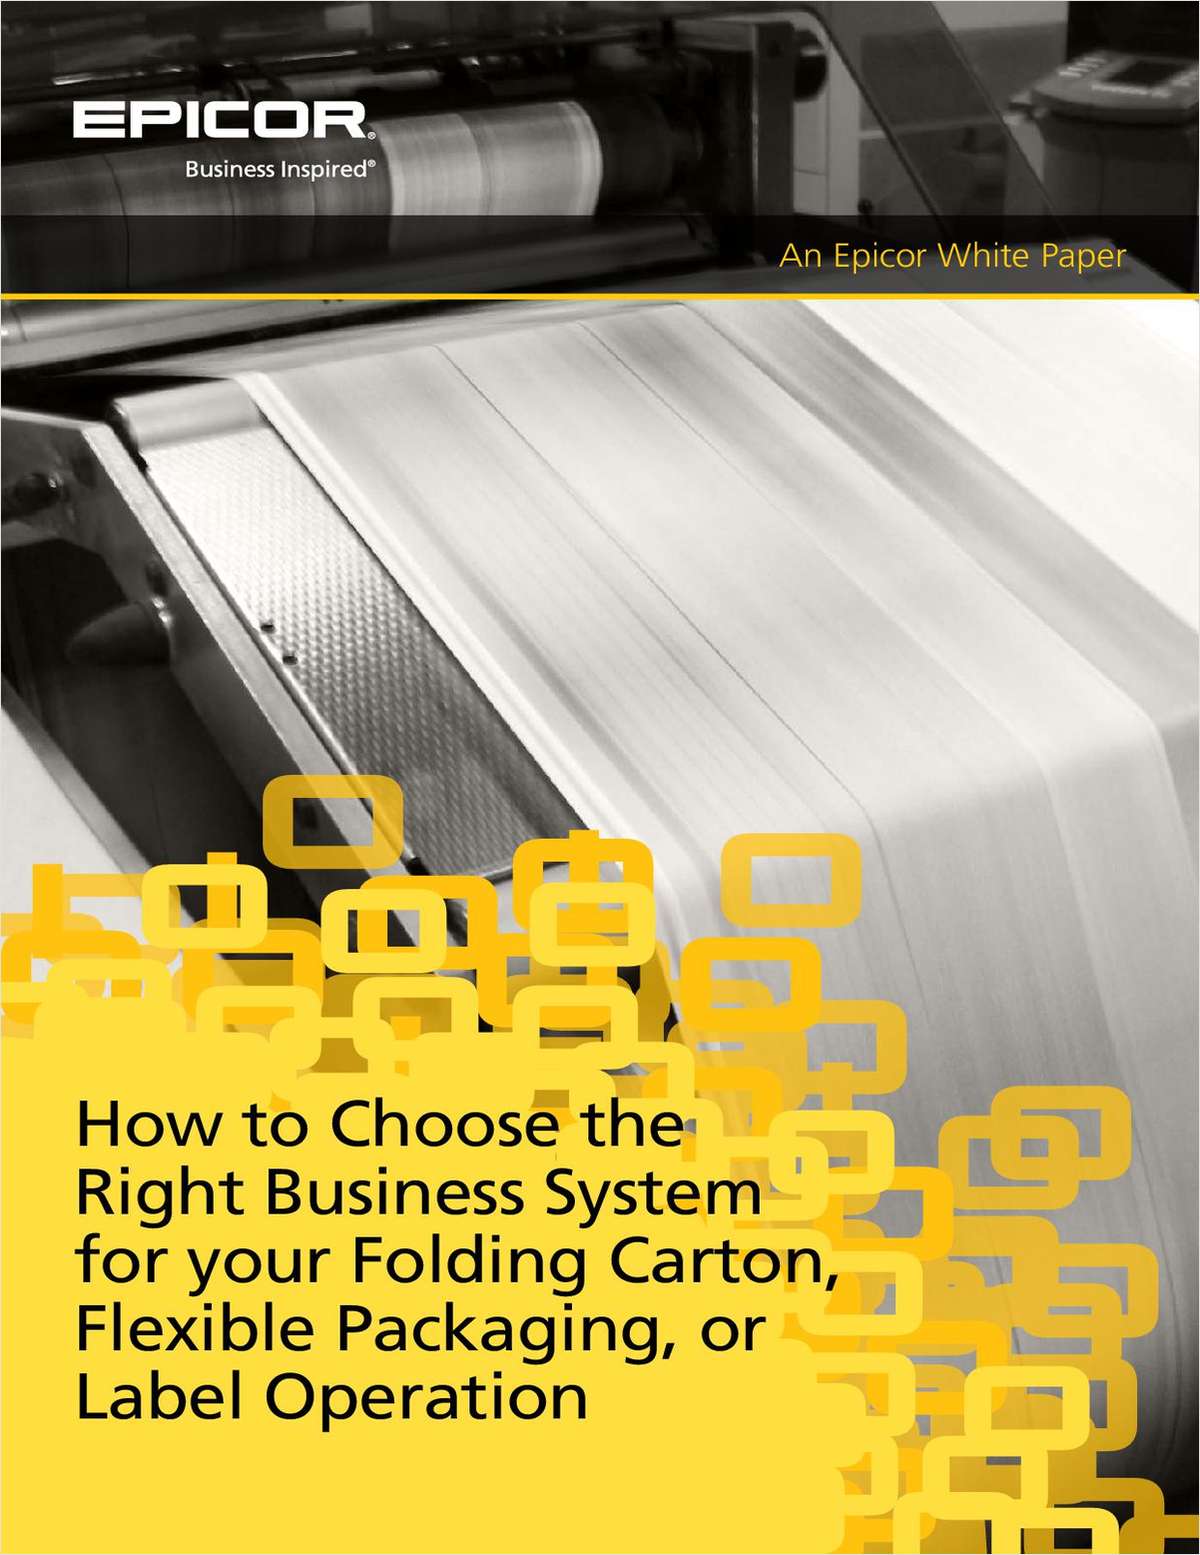 How to Choose the Right Business System for Your Folding Carton, Flexible Packaging, Or Label Operation